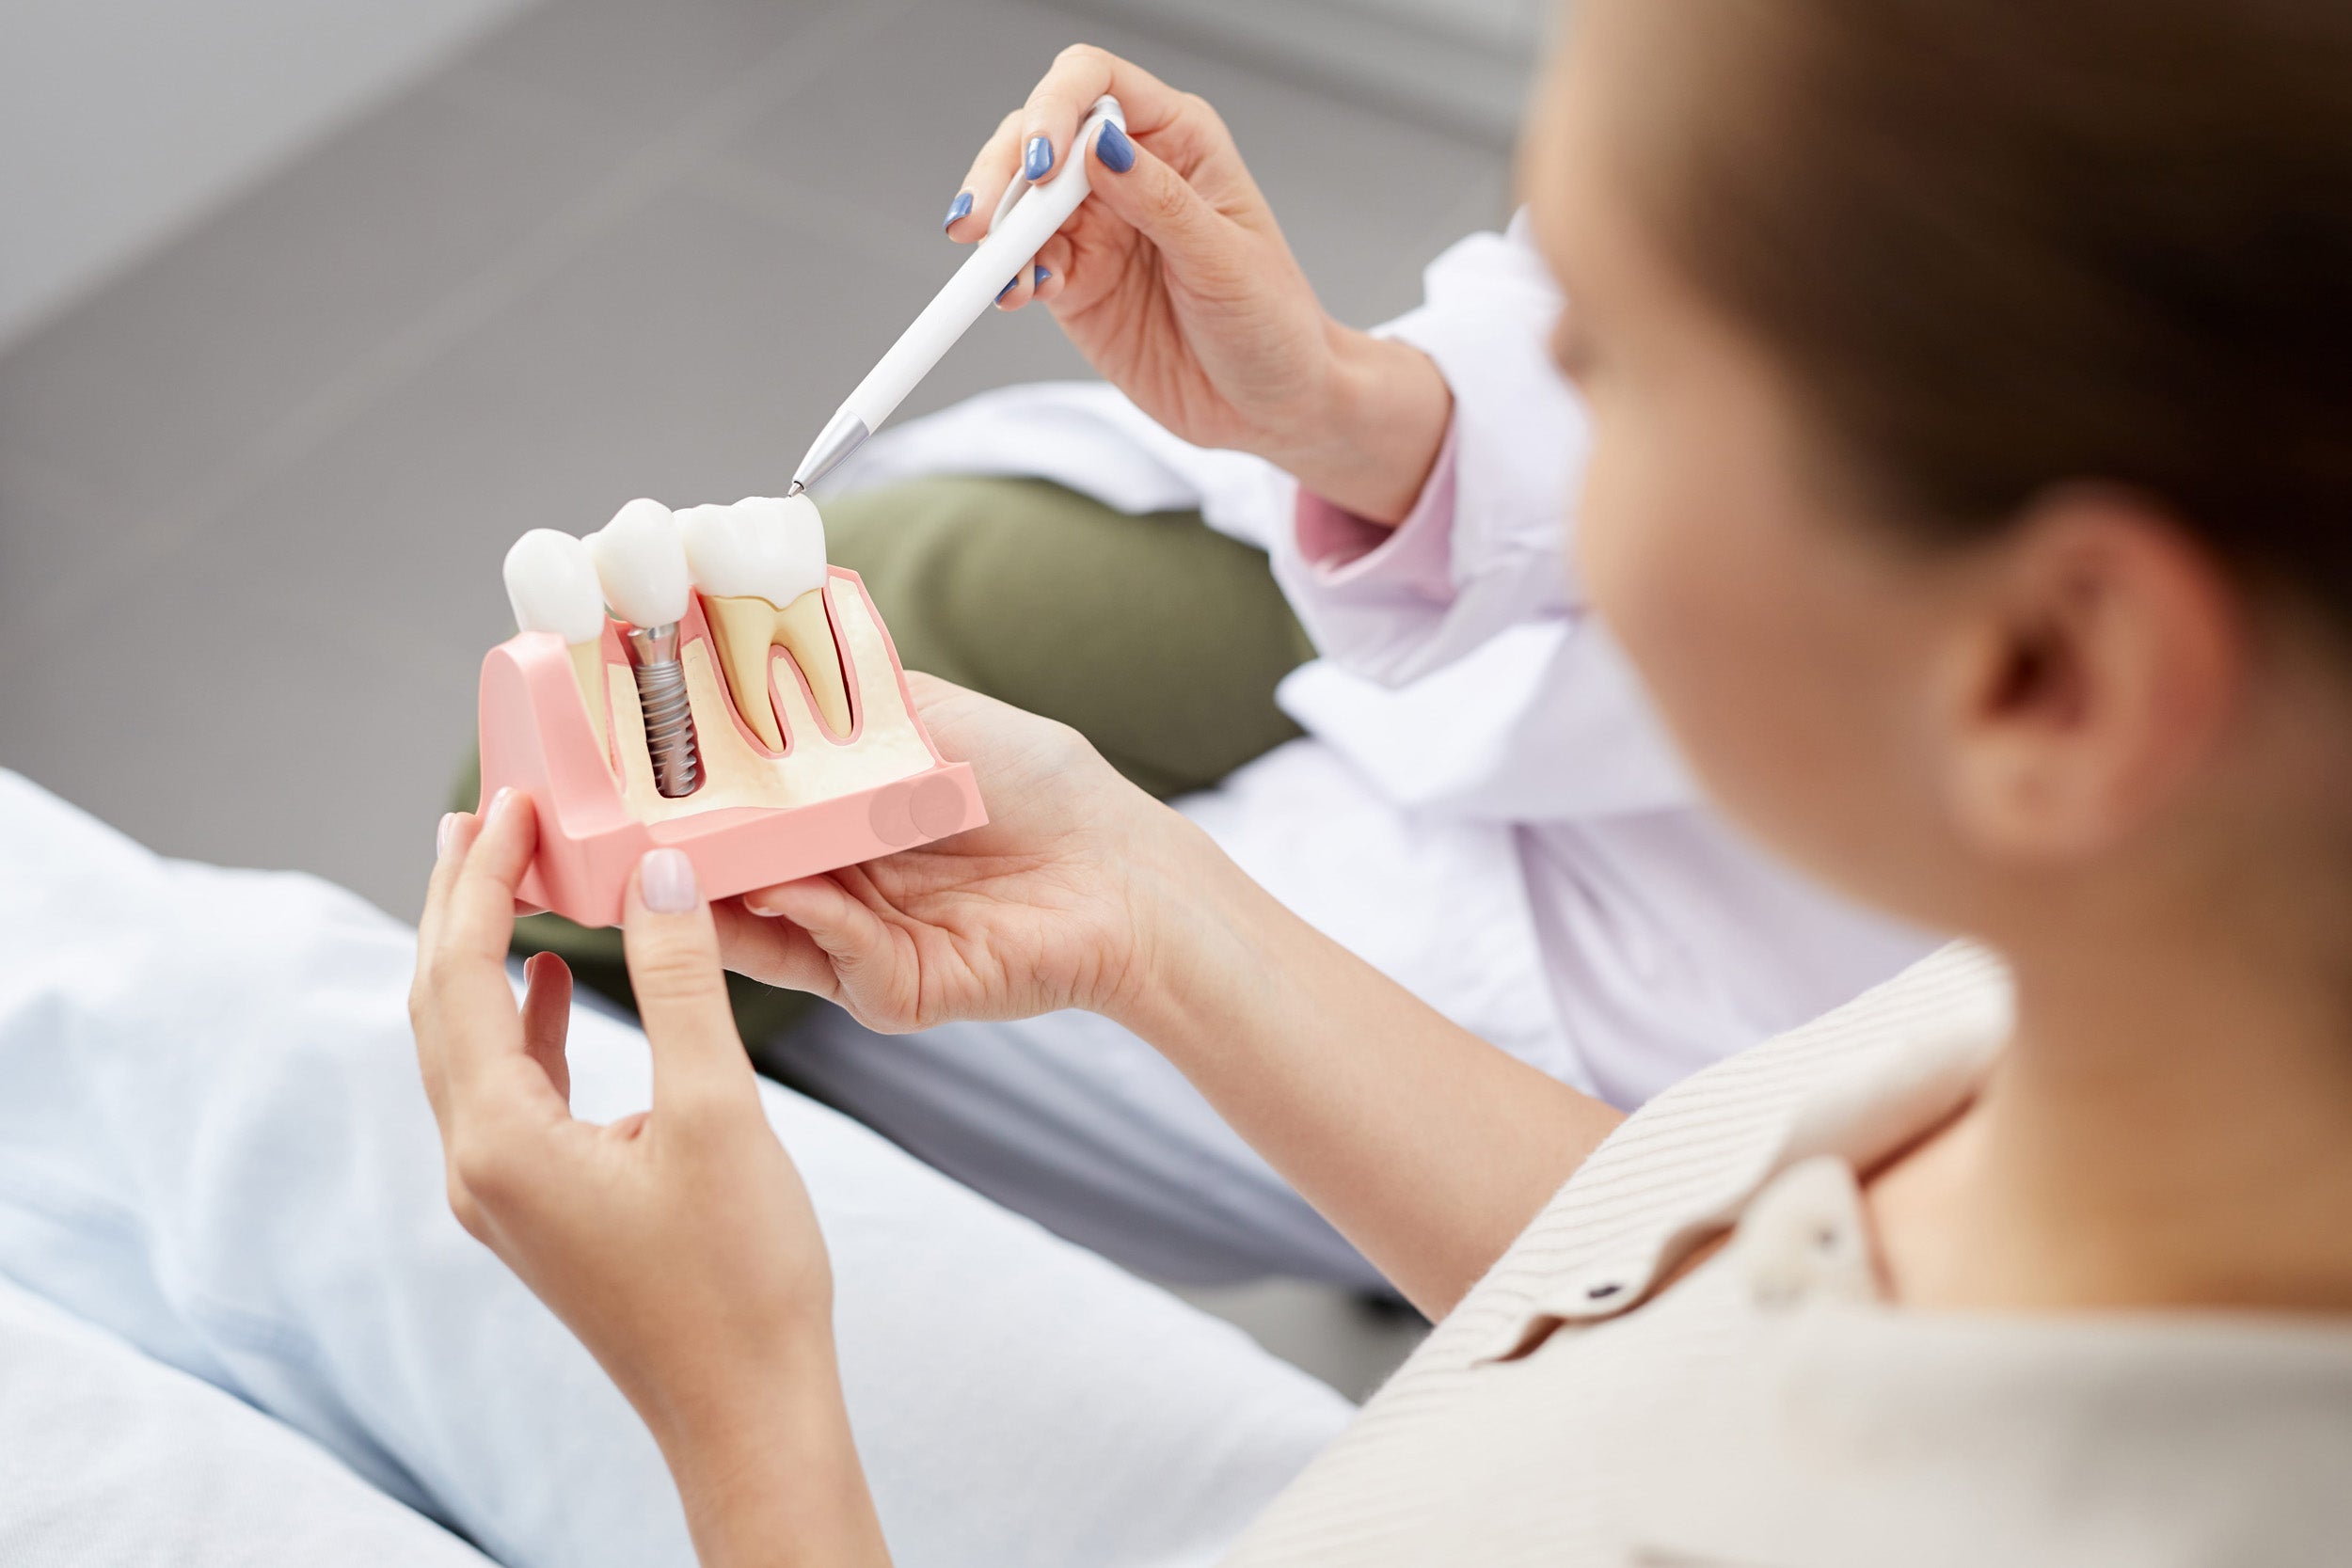 Dental Implant Surgery: A Complete Overview for Potential Patients